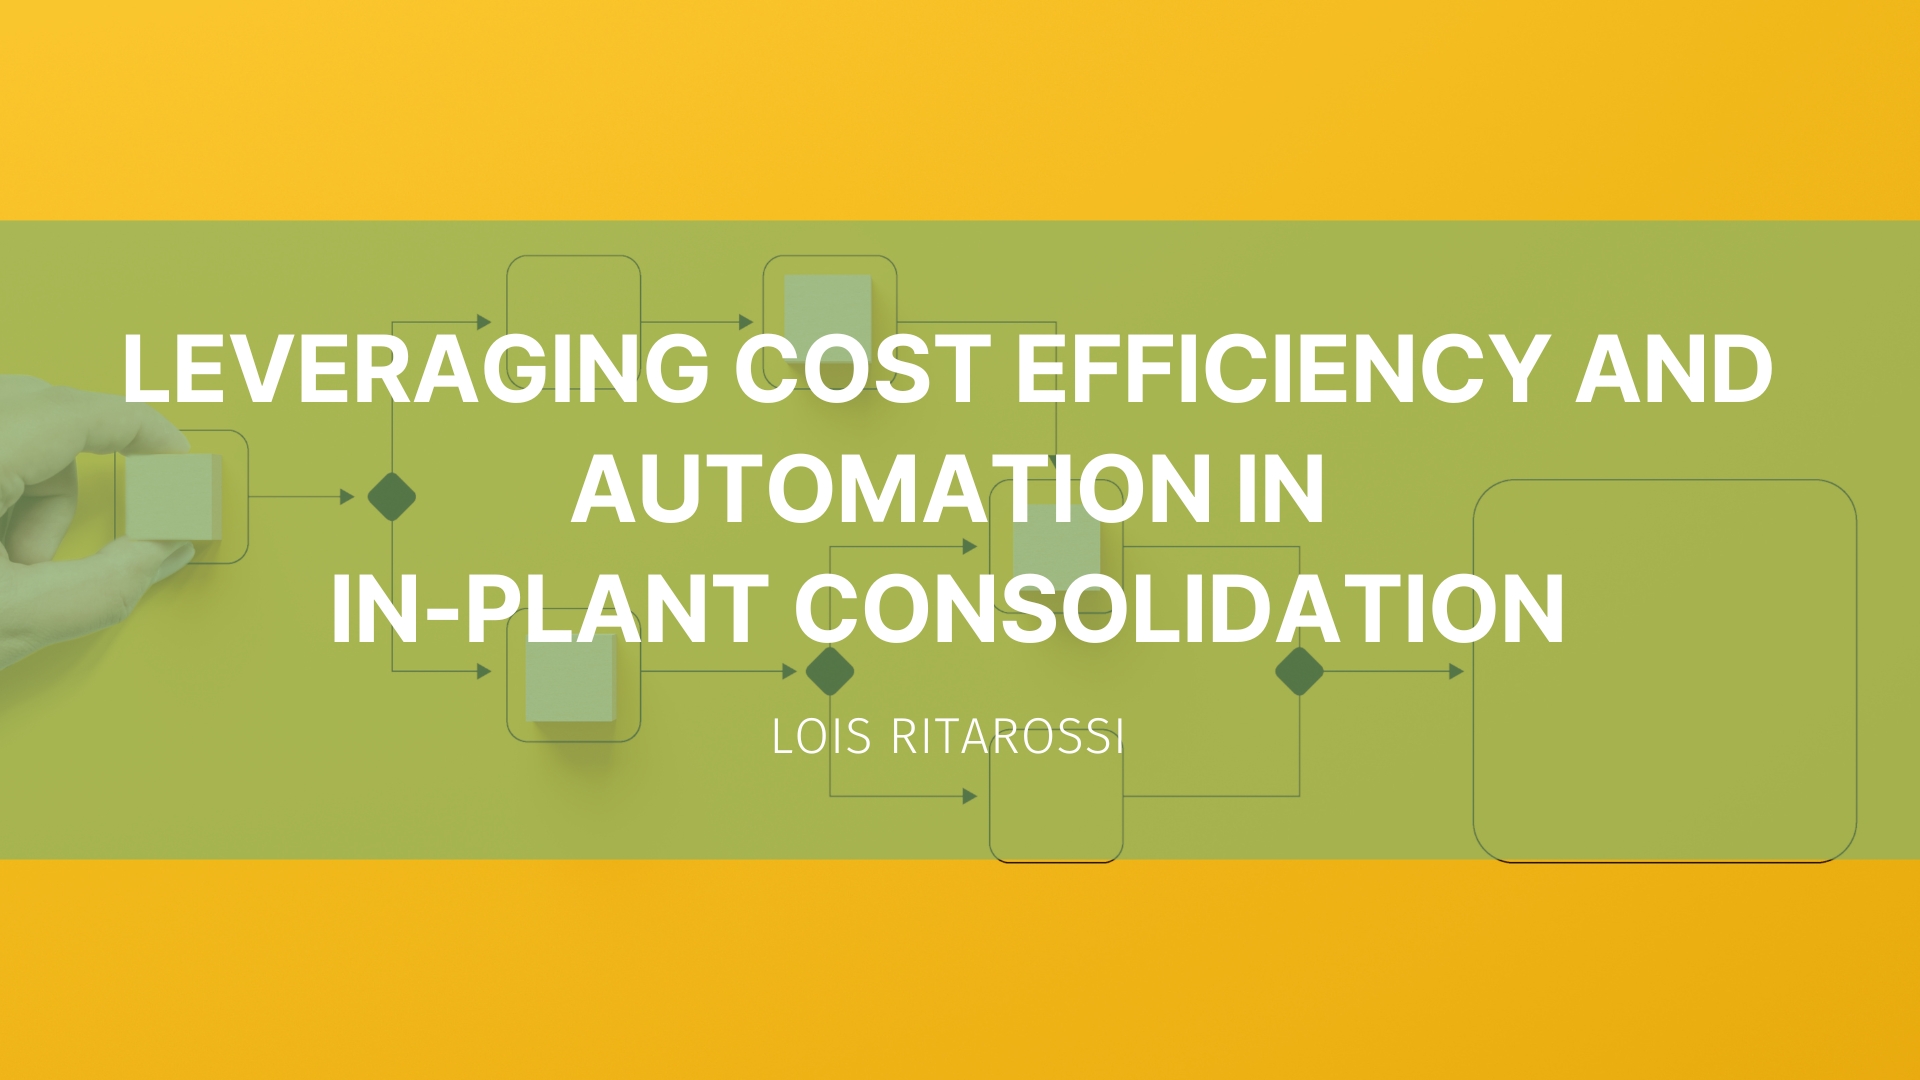 Featured image for “Leveraging Cost Efficiency and Automation in In-Plant Consolidation”